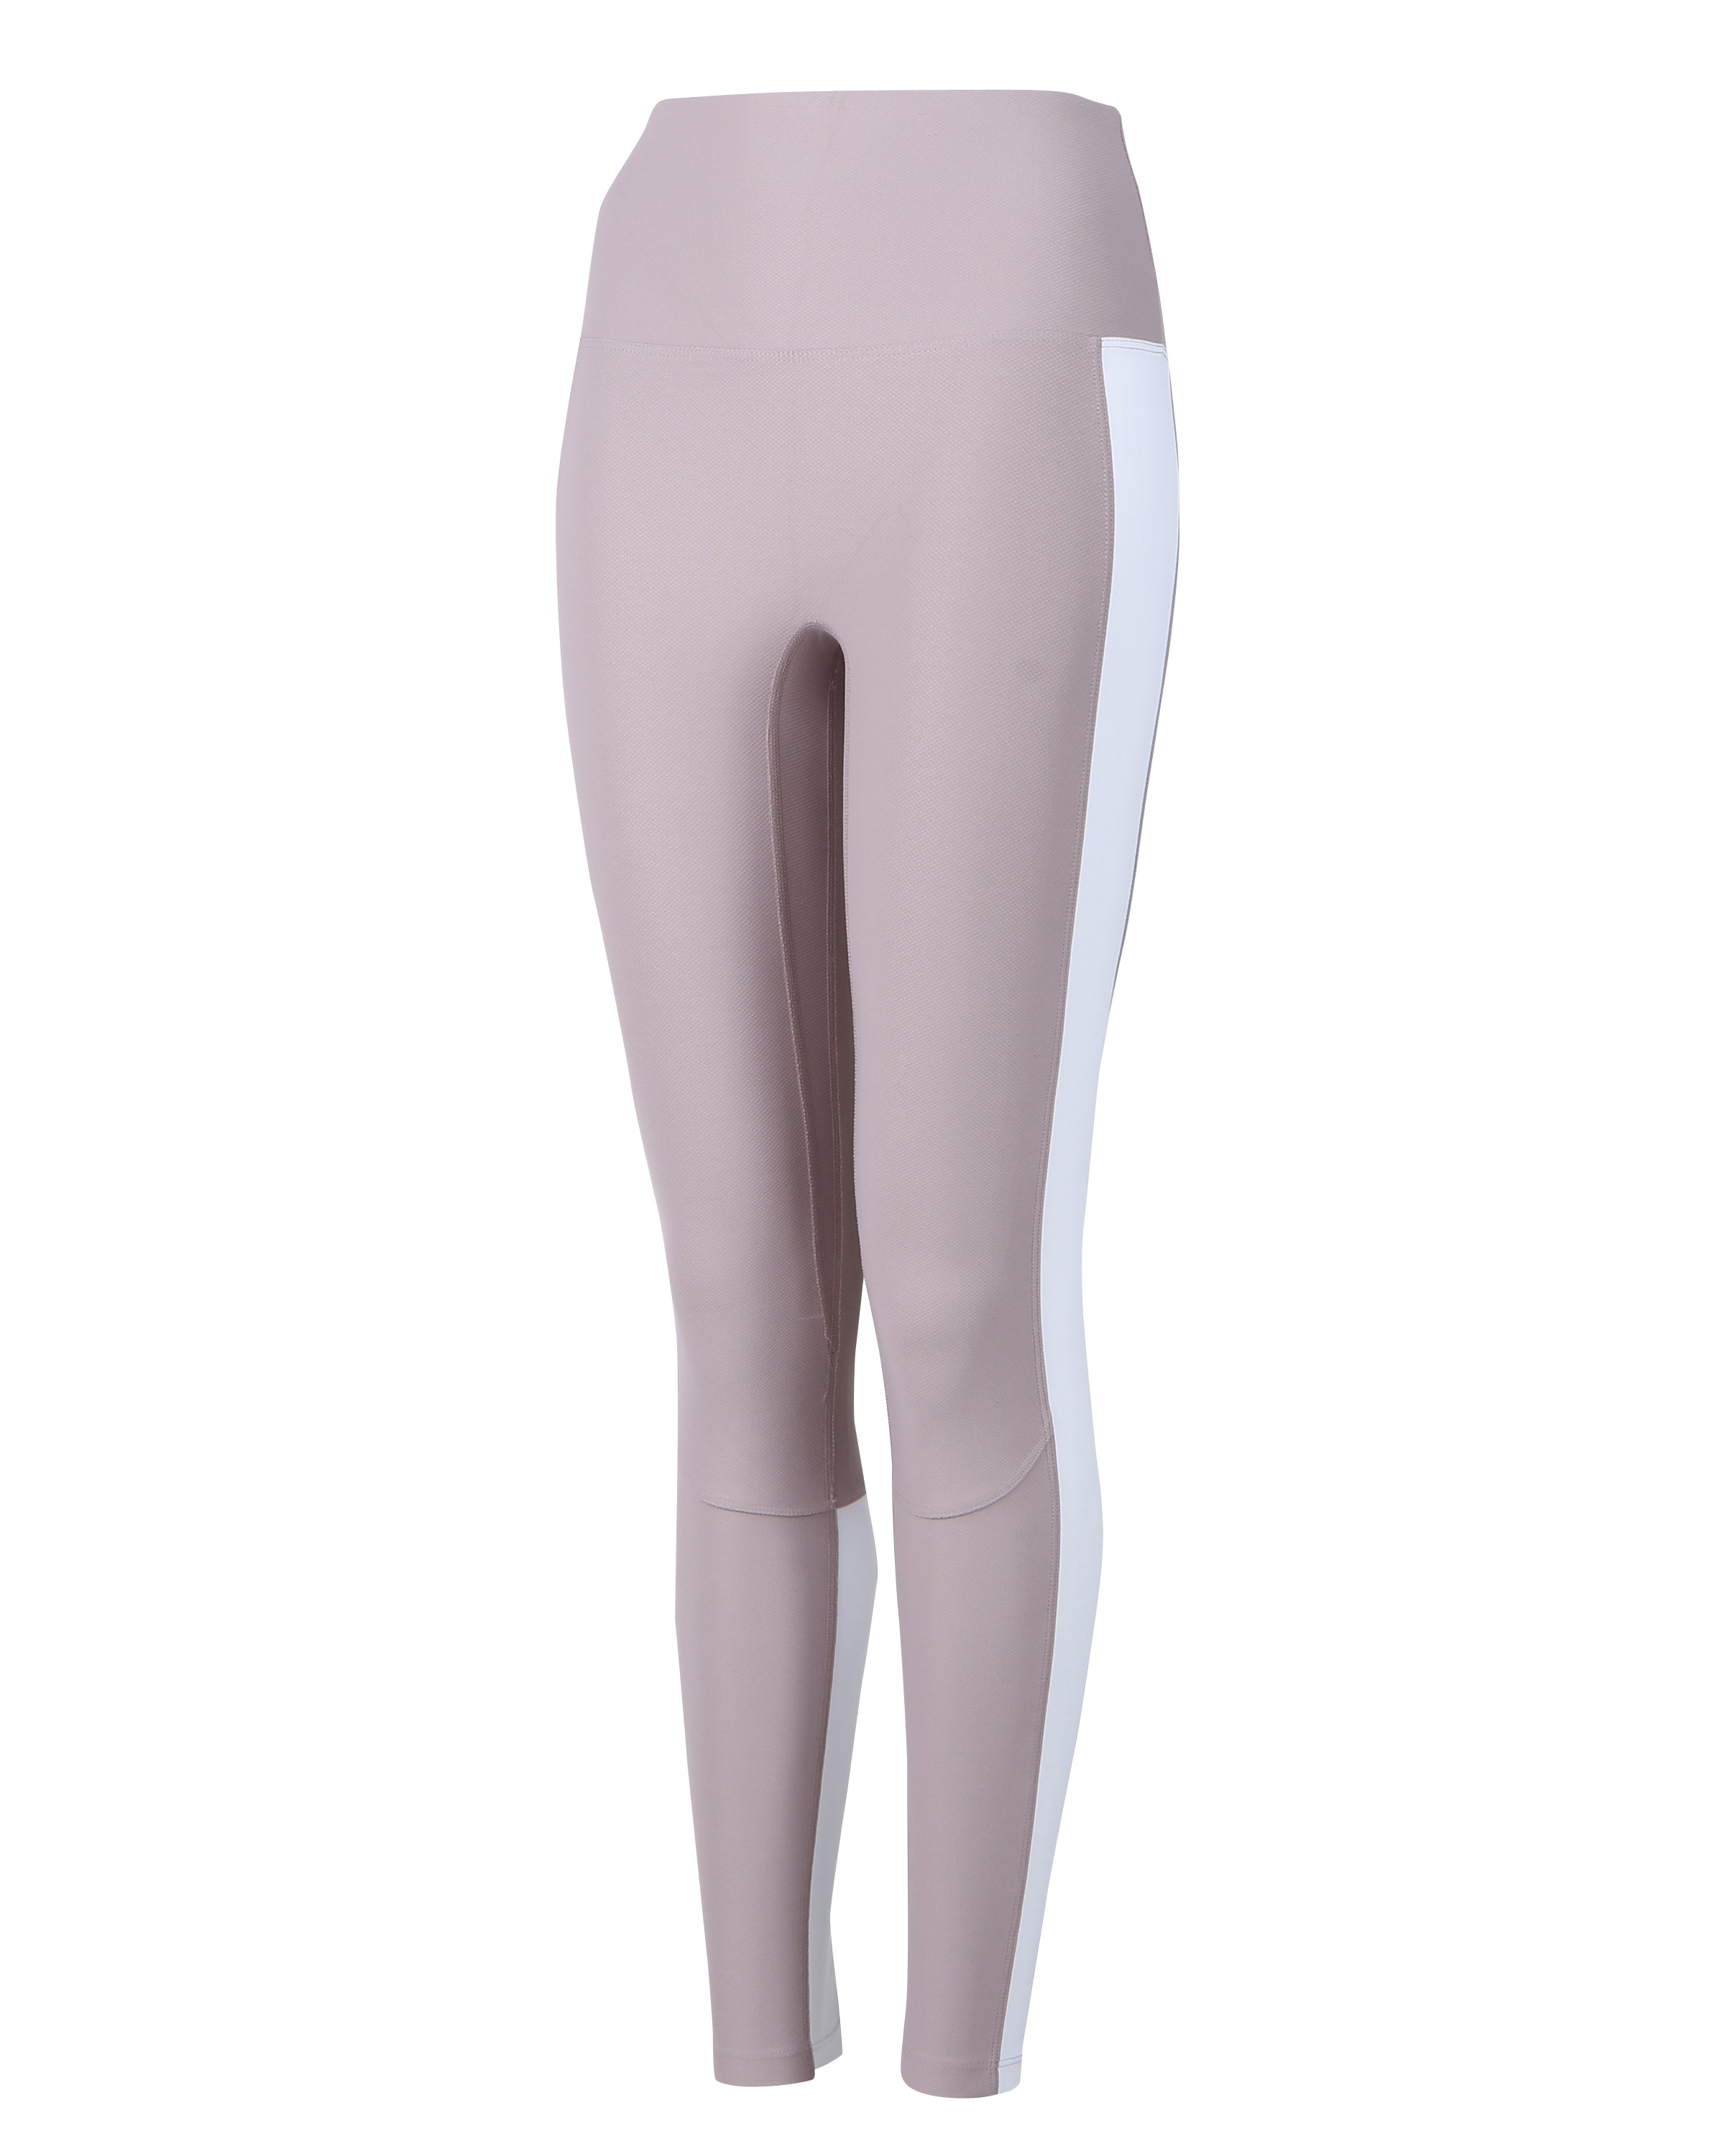 Nylora Levee Leggings in Mint & Iridescent Pale Blue Combo